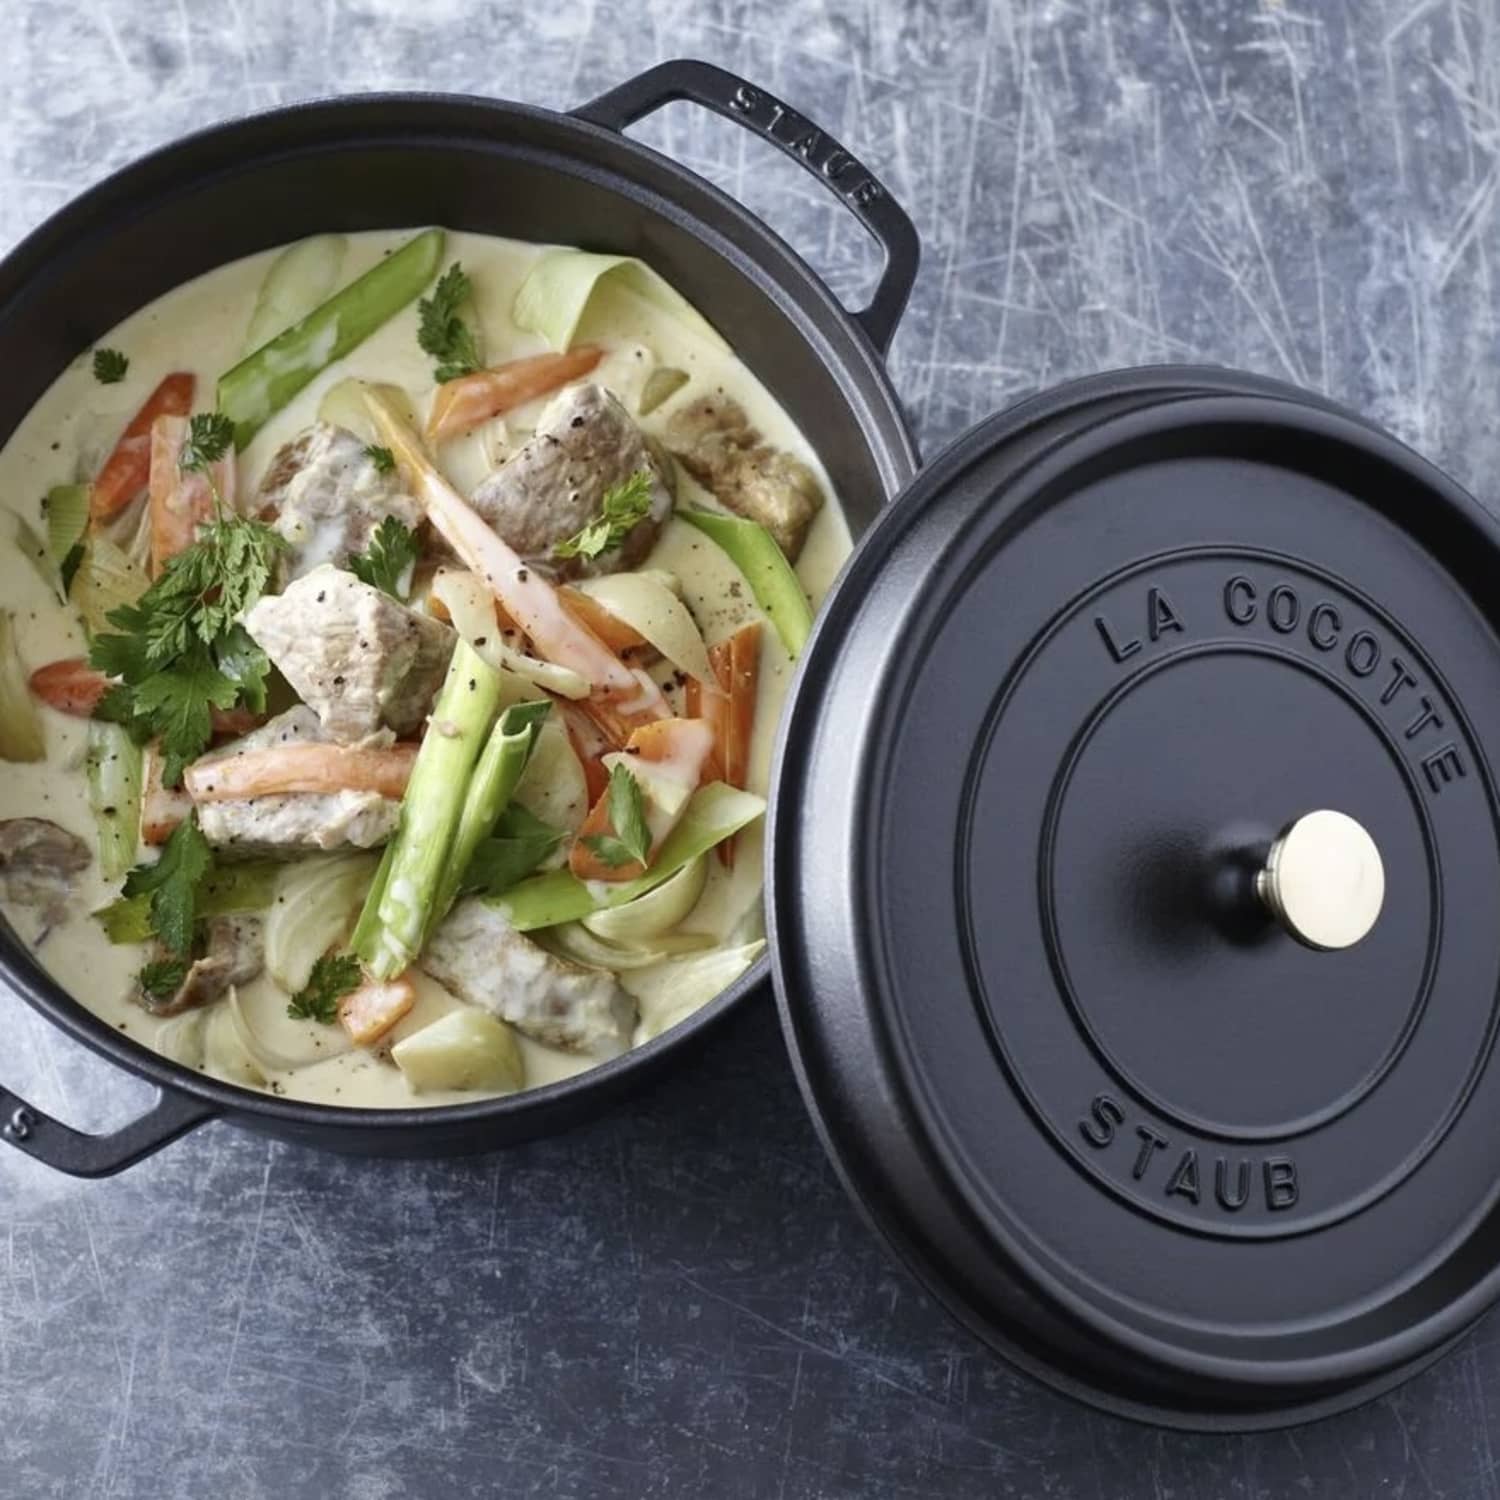 Dutch Ovens, Skillets, and More Cookware Essentials Are Up to 60% Off at   Right Now